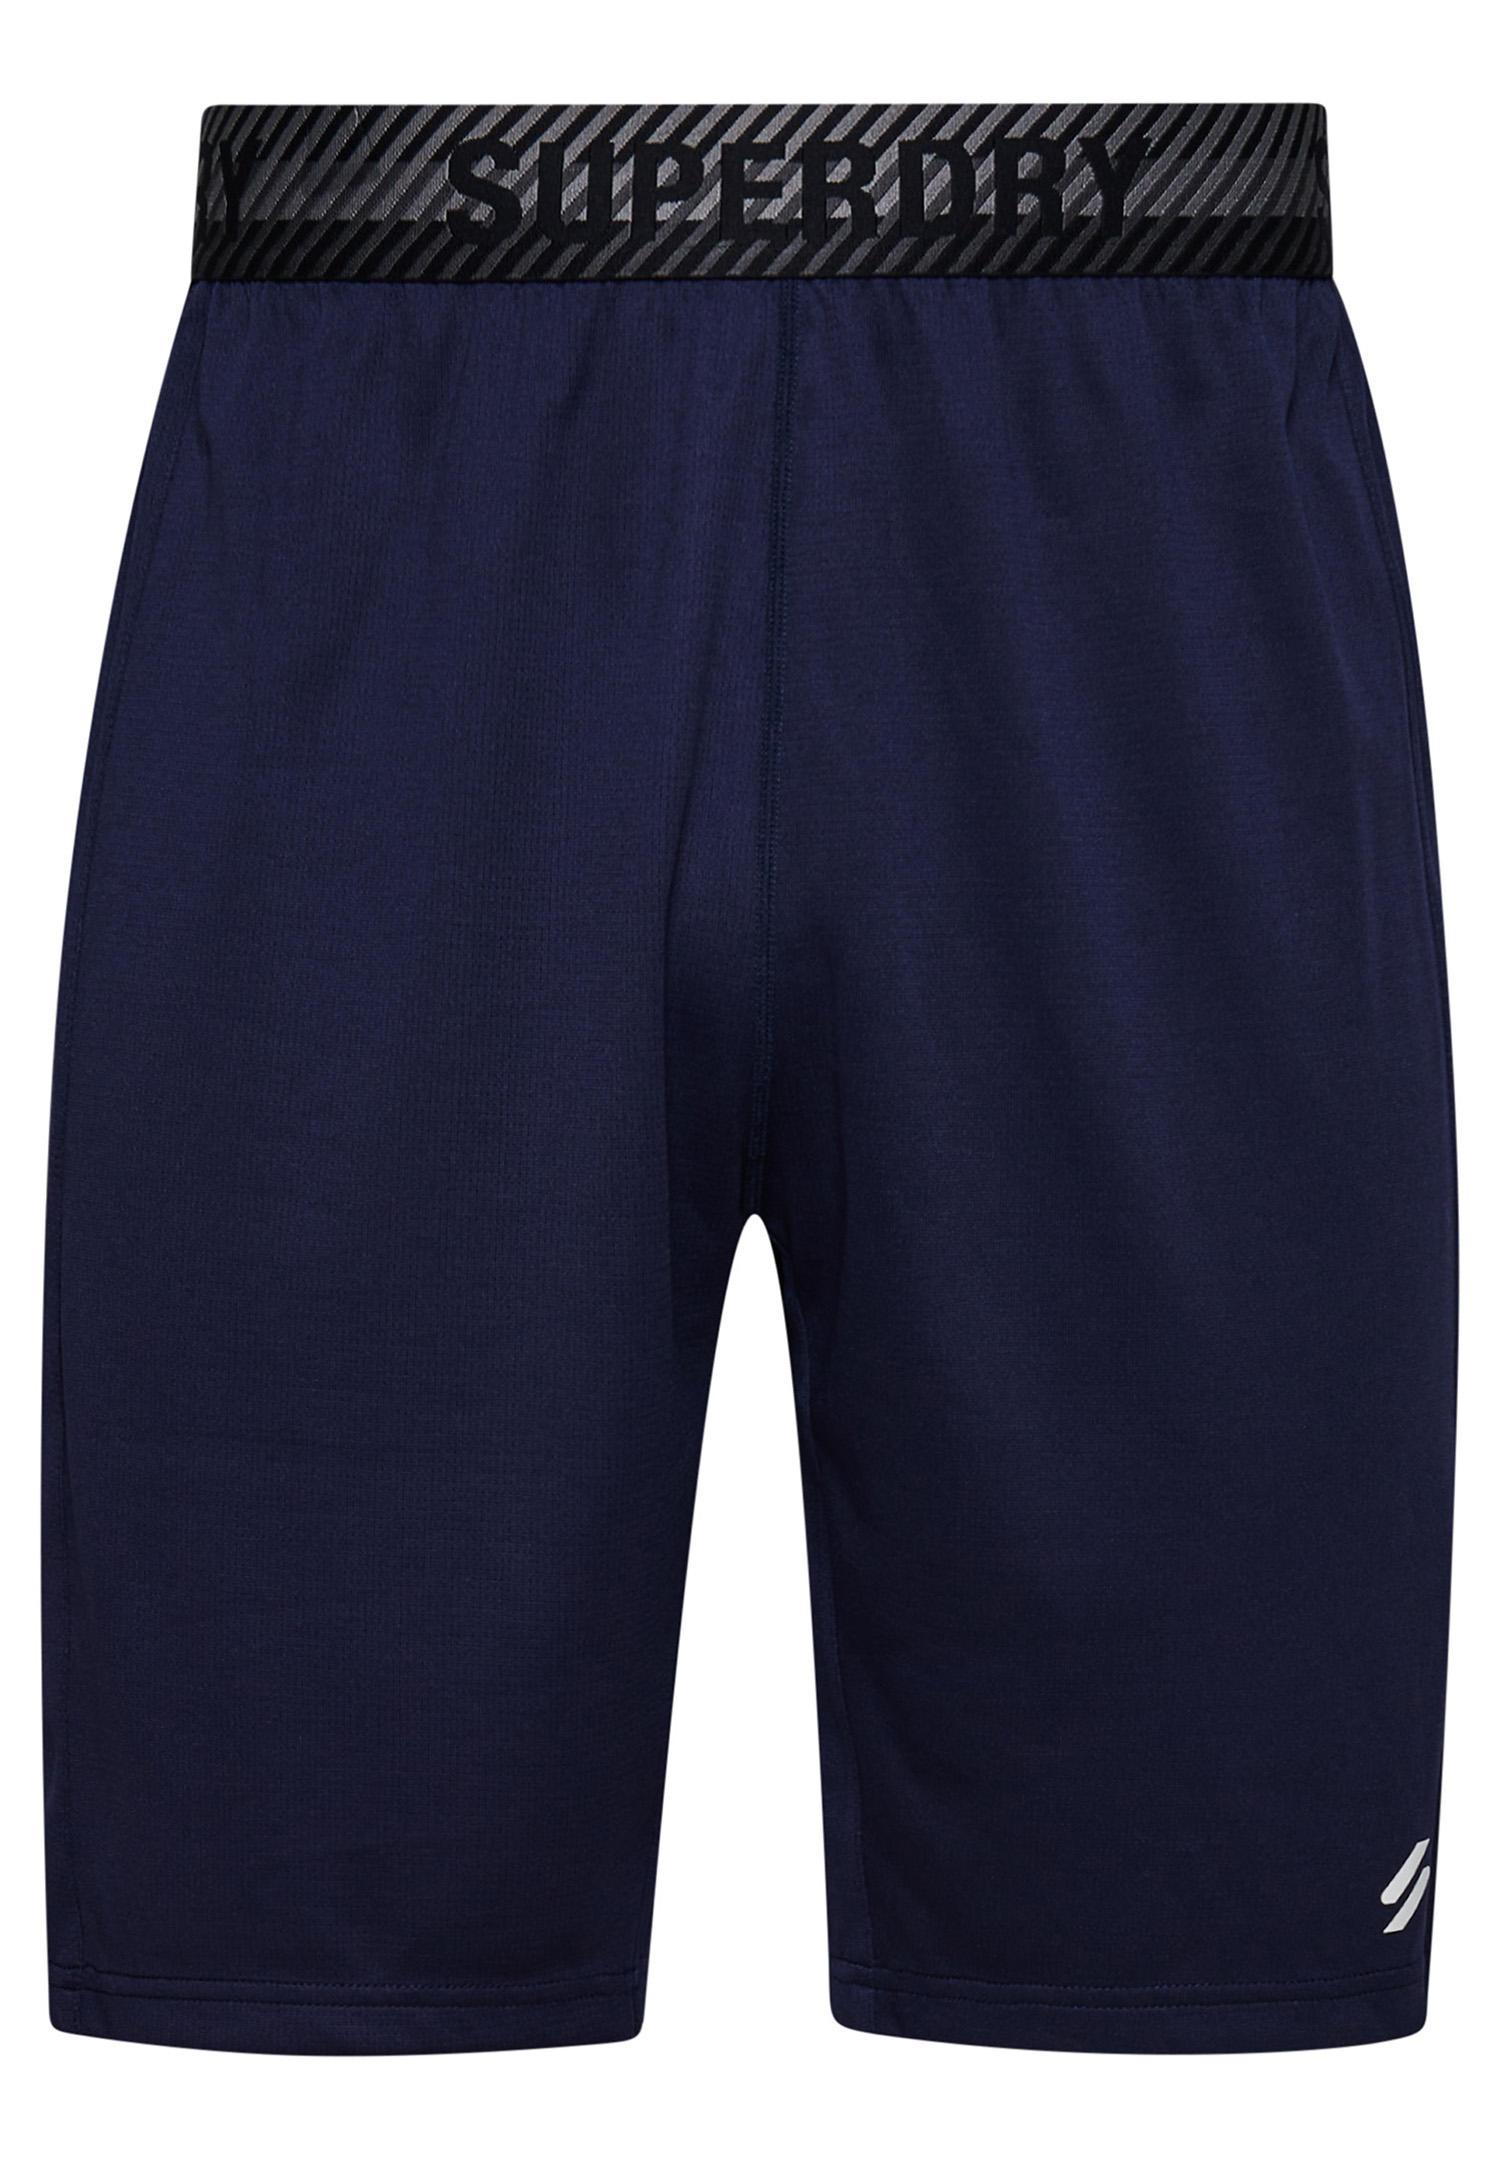 Superdry Mens Core Relaxed Shorts, Rich Navy, Medium